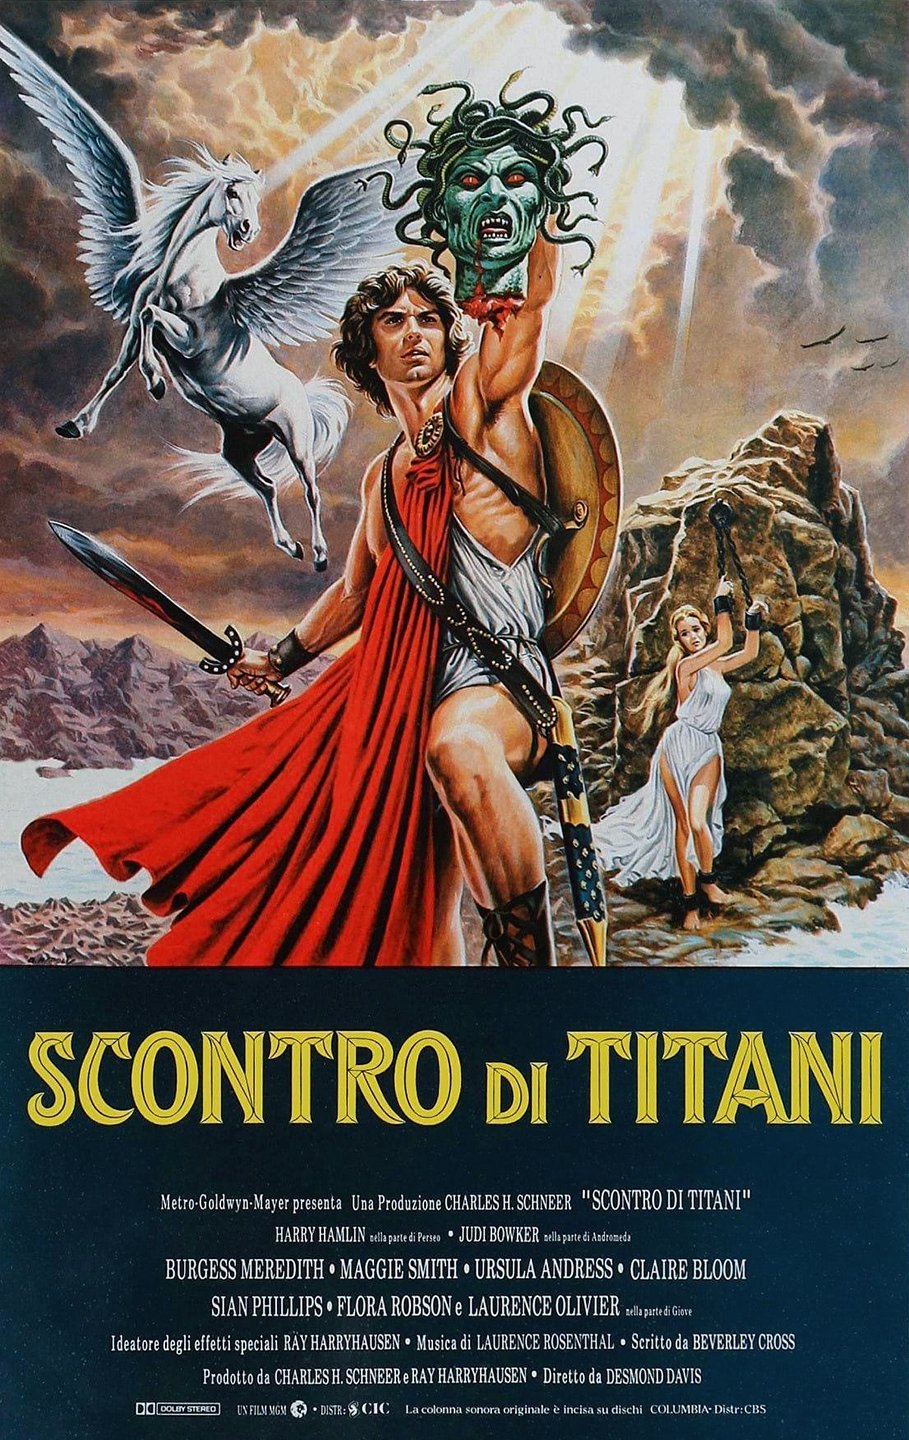 Clash of Titans' first entry in '80s movie encore